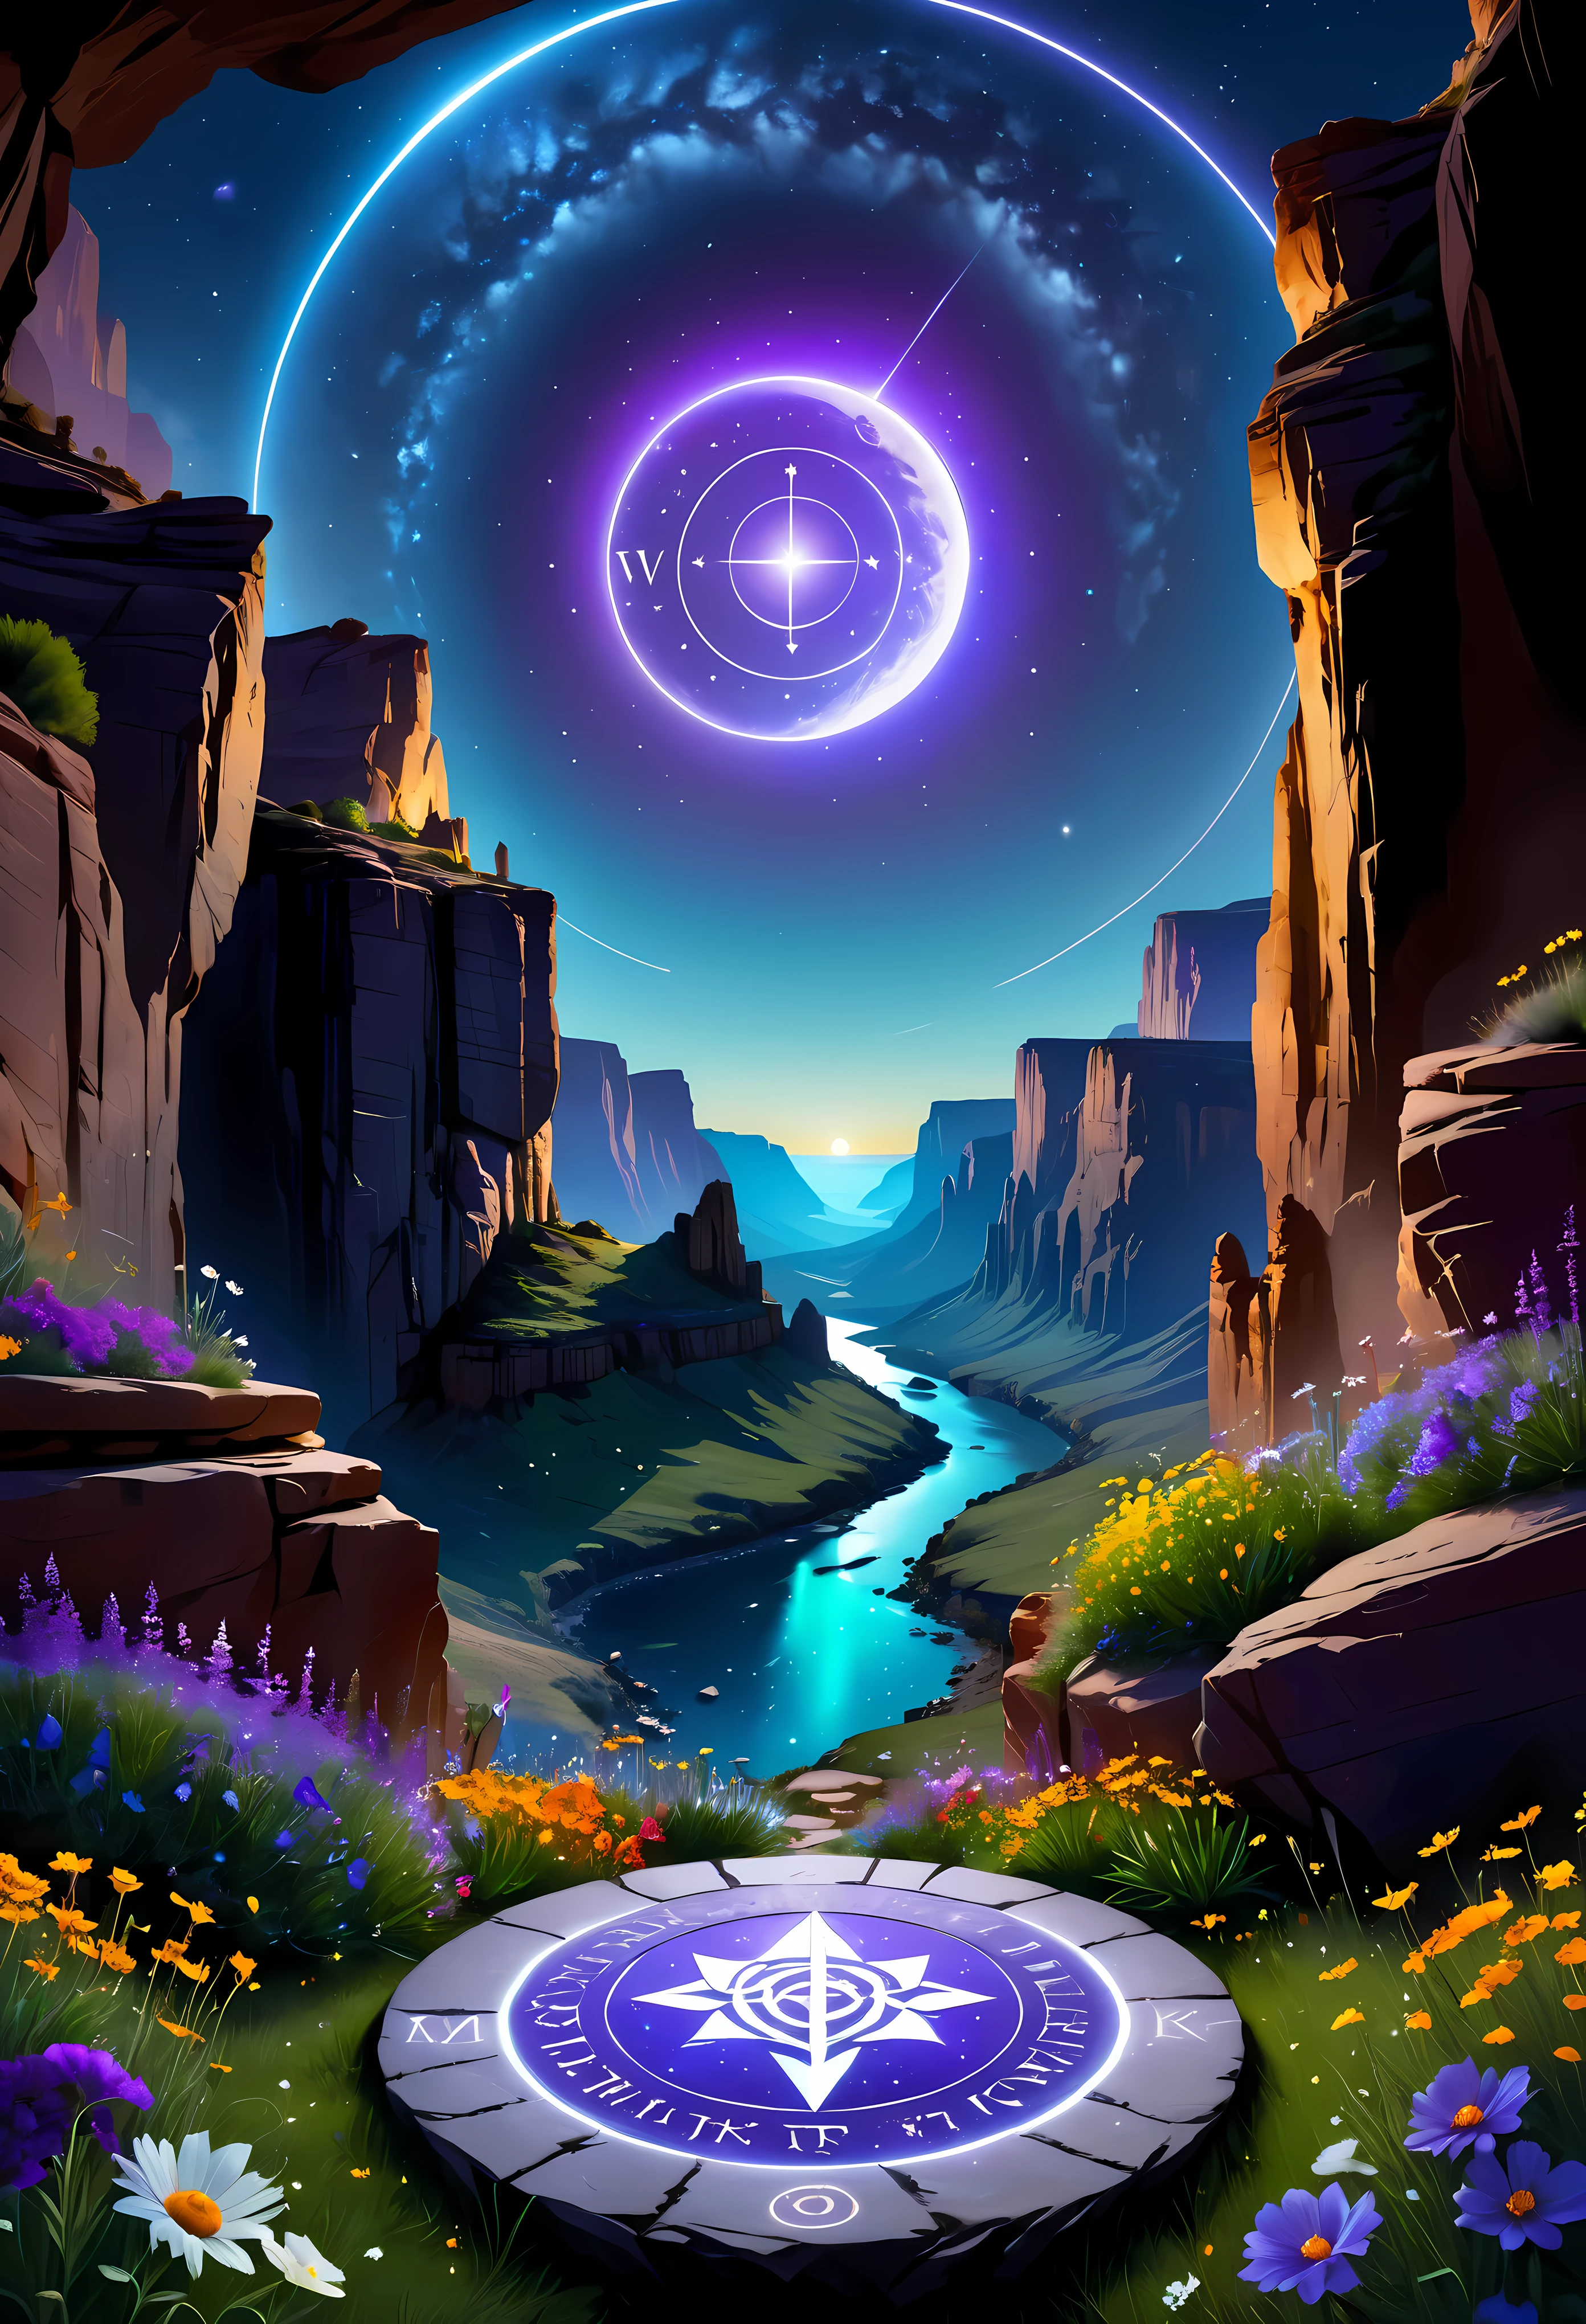 Towering steep and towering high magic circle in a cliff garden, wild flowers, asymmetric magic circle cliff canyon, ((magical inscription):1.2), (glowing runes), (glowing sigil), Coexistence with the natural environment, magic circle canyon night, clear night sky, meteors across, moonlight, extremely detailed, best quality, masterpiece, high resolution, Hyperrealistic, 8K, top-view,  high angle view, Violet Color Palette, Minimalism.